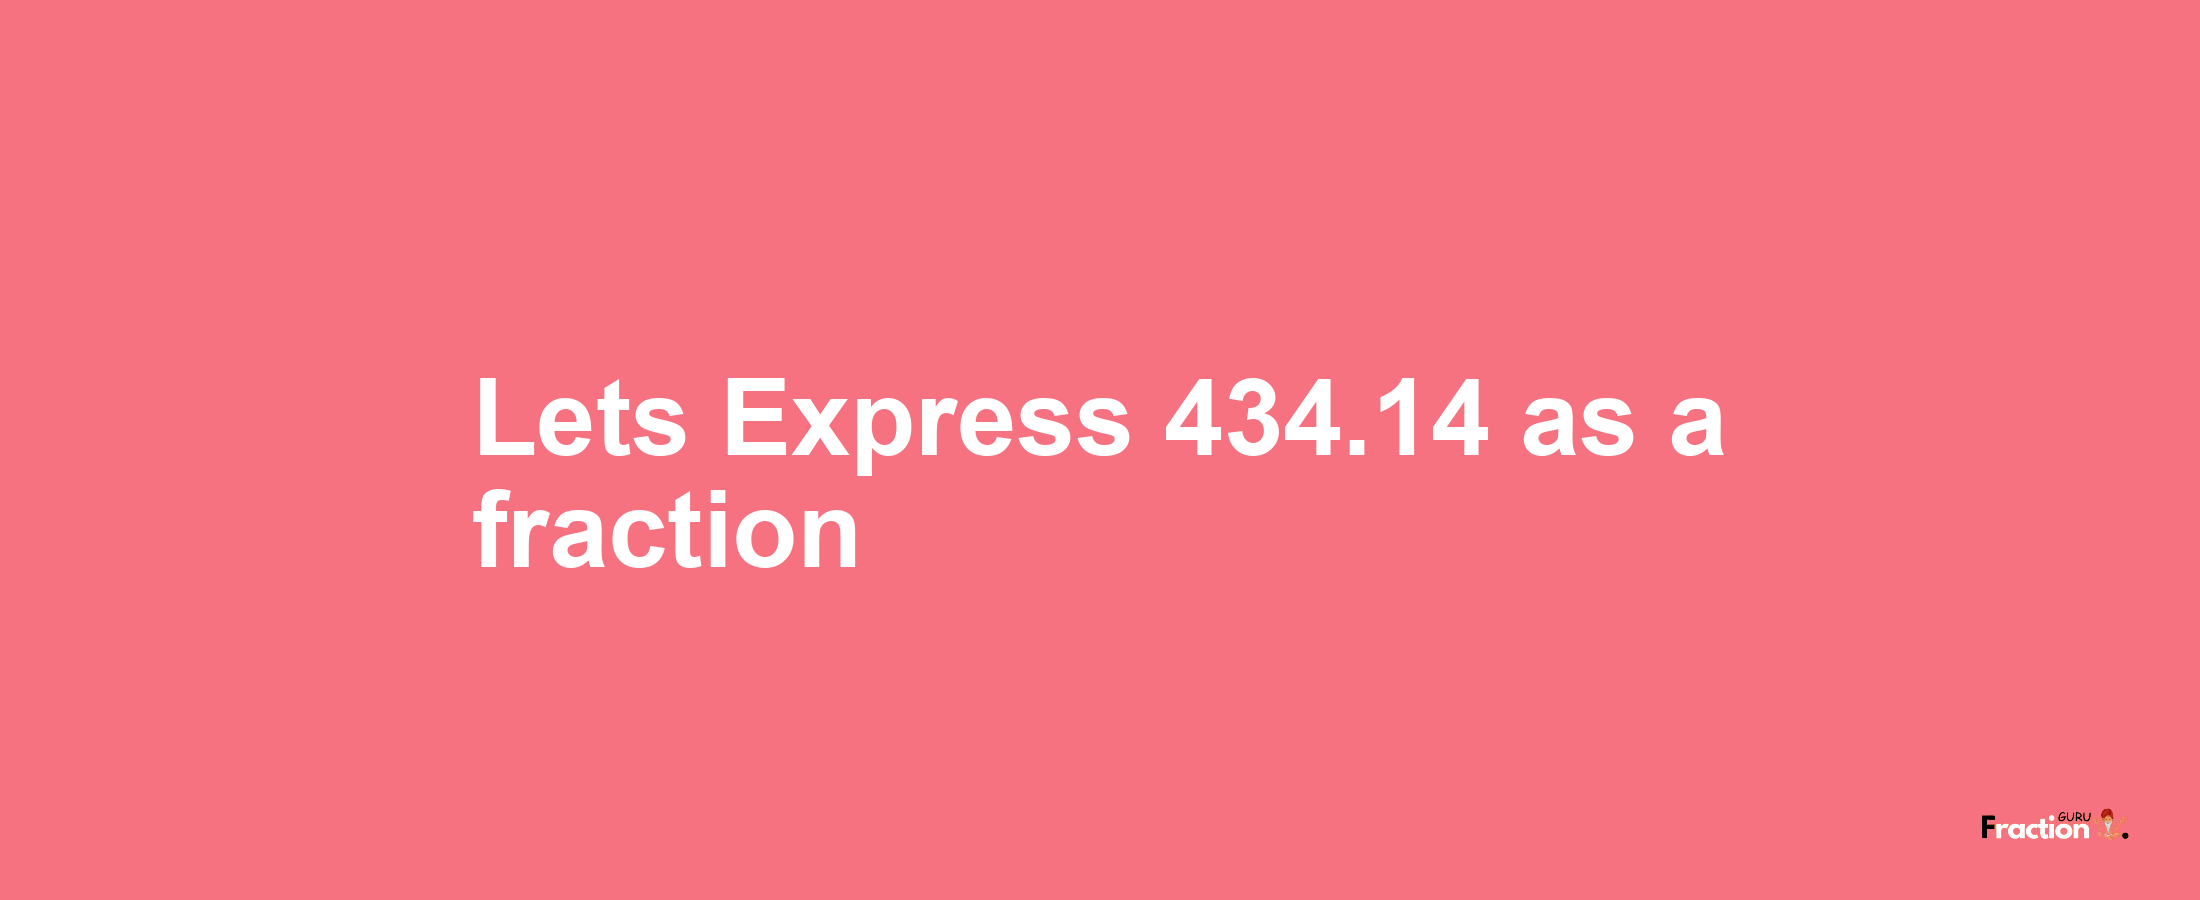 Lets Express 434.14 as afraction